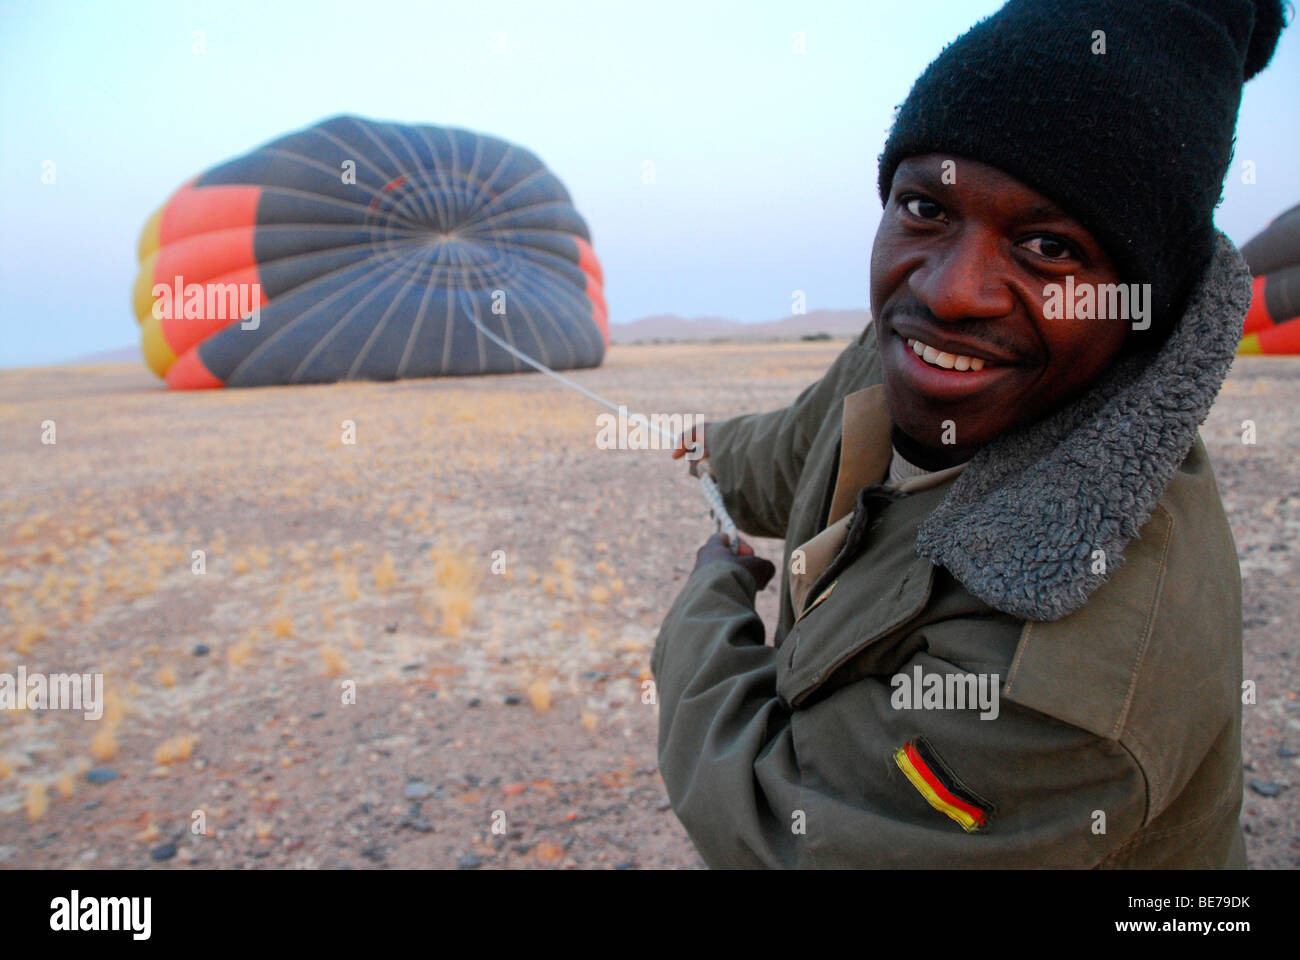 Native wearing a German army jacket helping to launch a balloon safari at dawn, Sossusvlei, Namibia, Africa Stock Photo